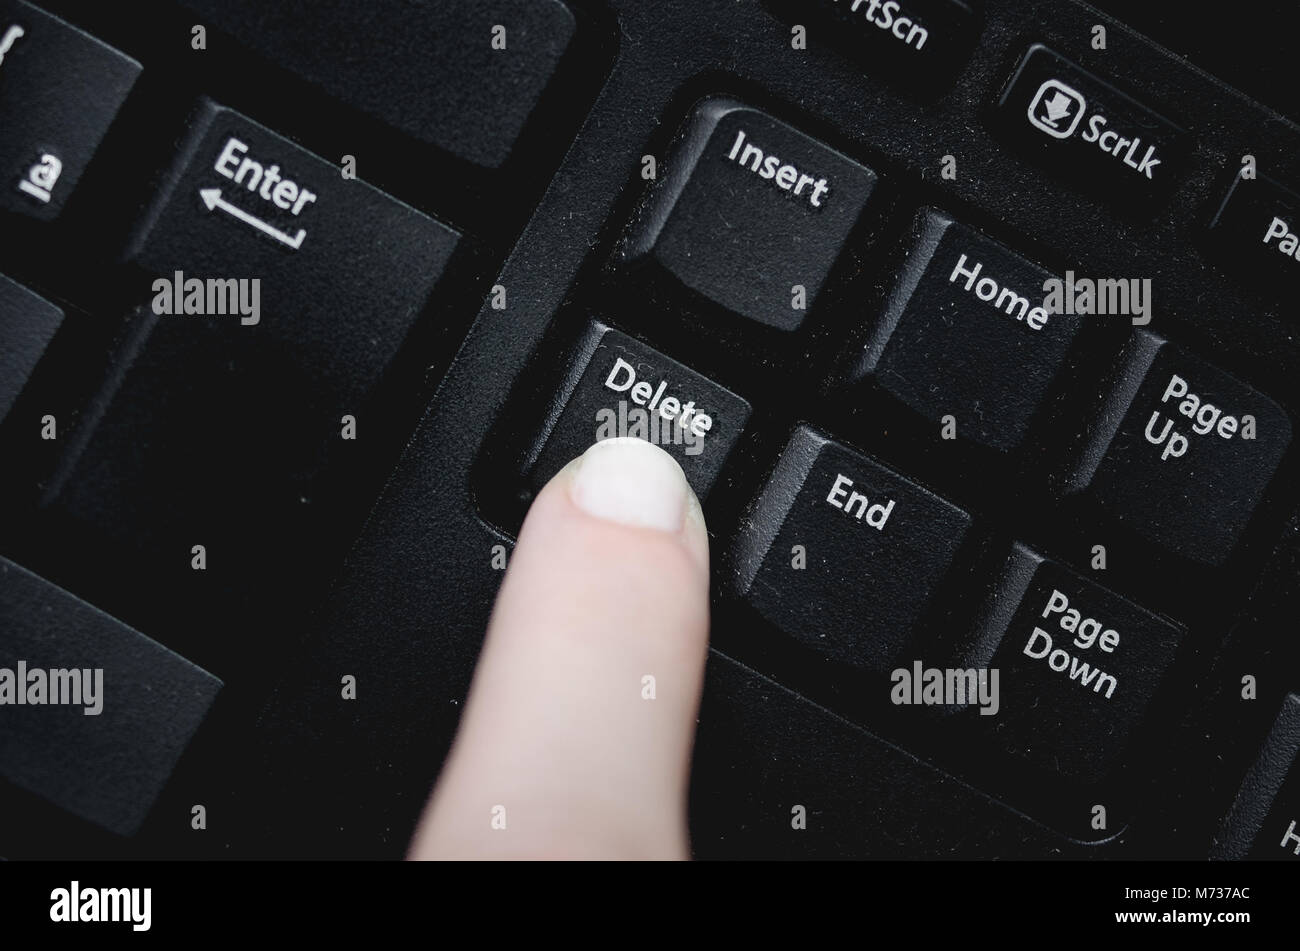 Finger over the delete key from a dusty black keyboard. Stock Photo